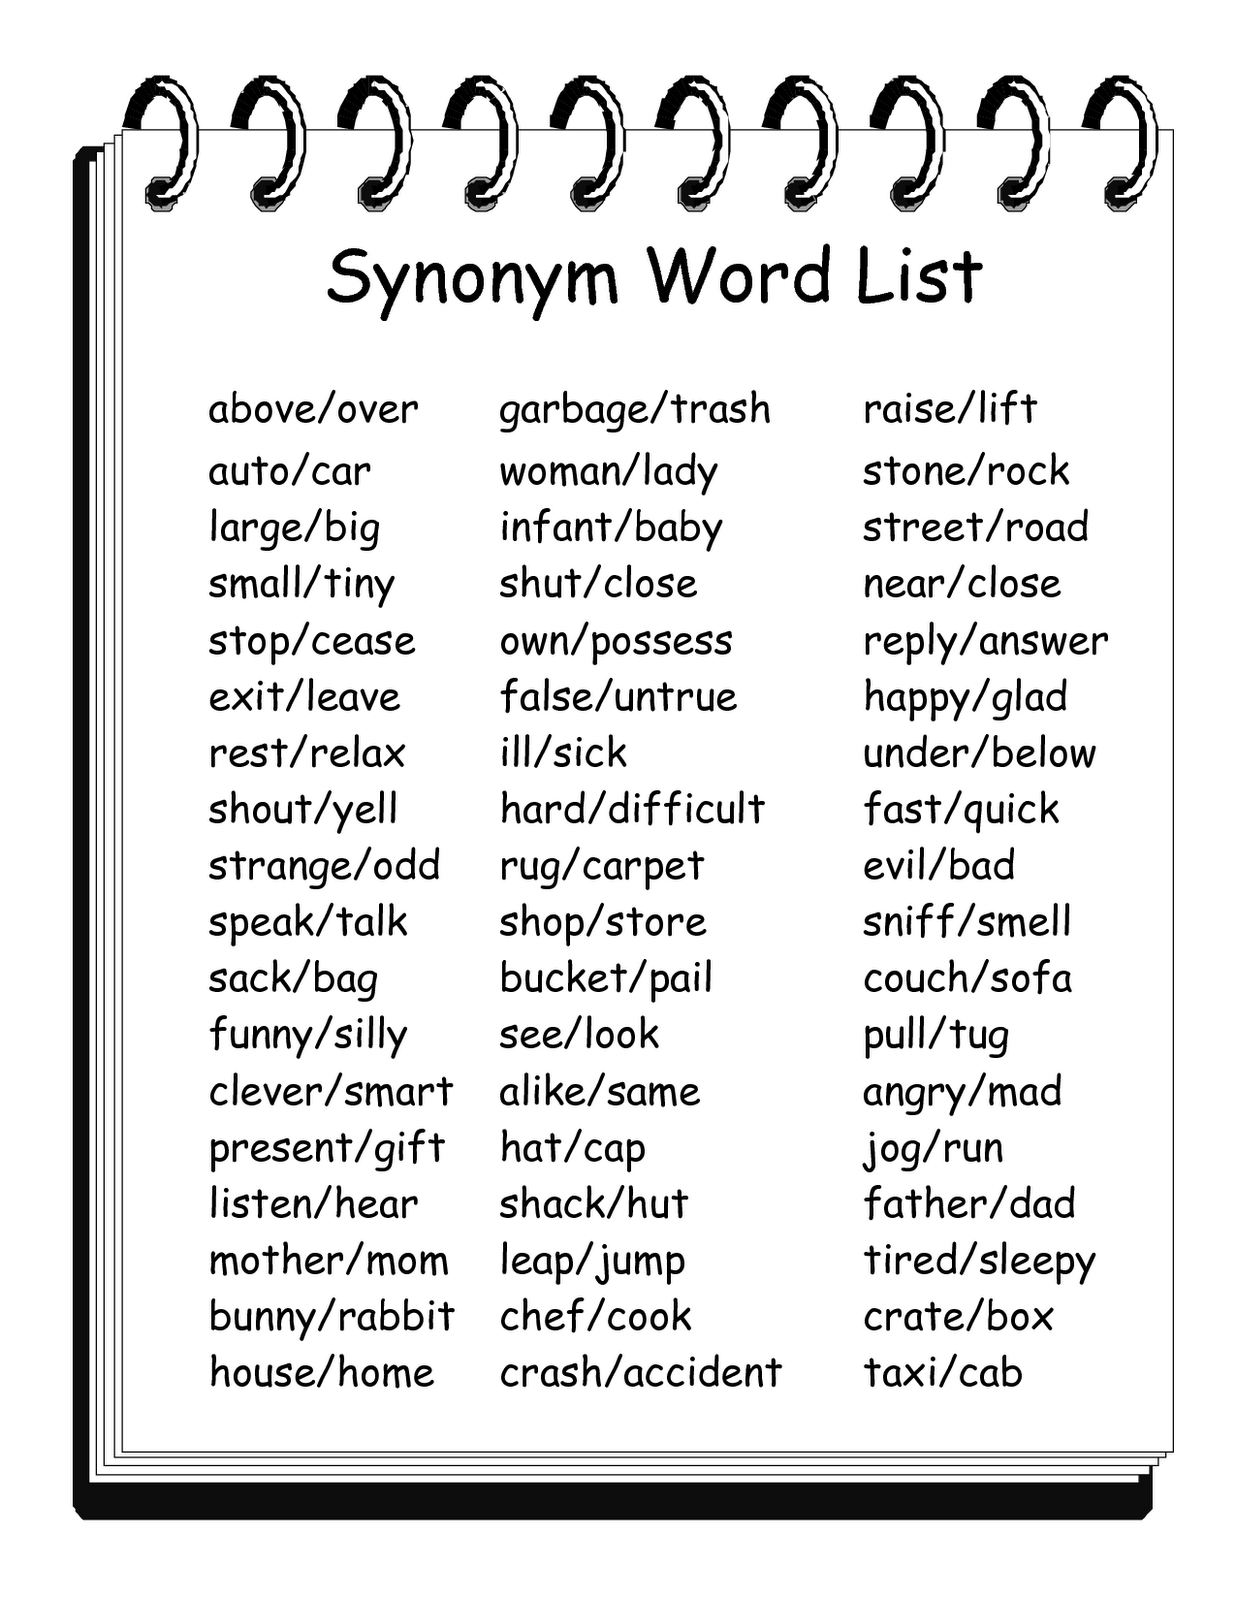 My English Pages Online: Synonyms - Antonyms